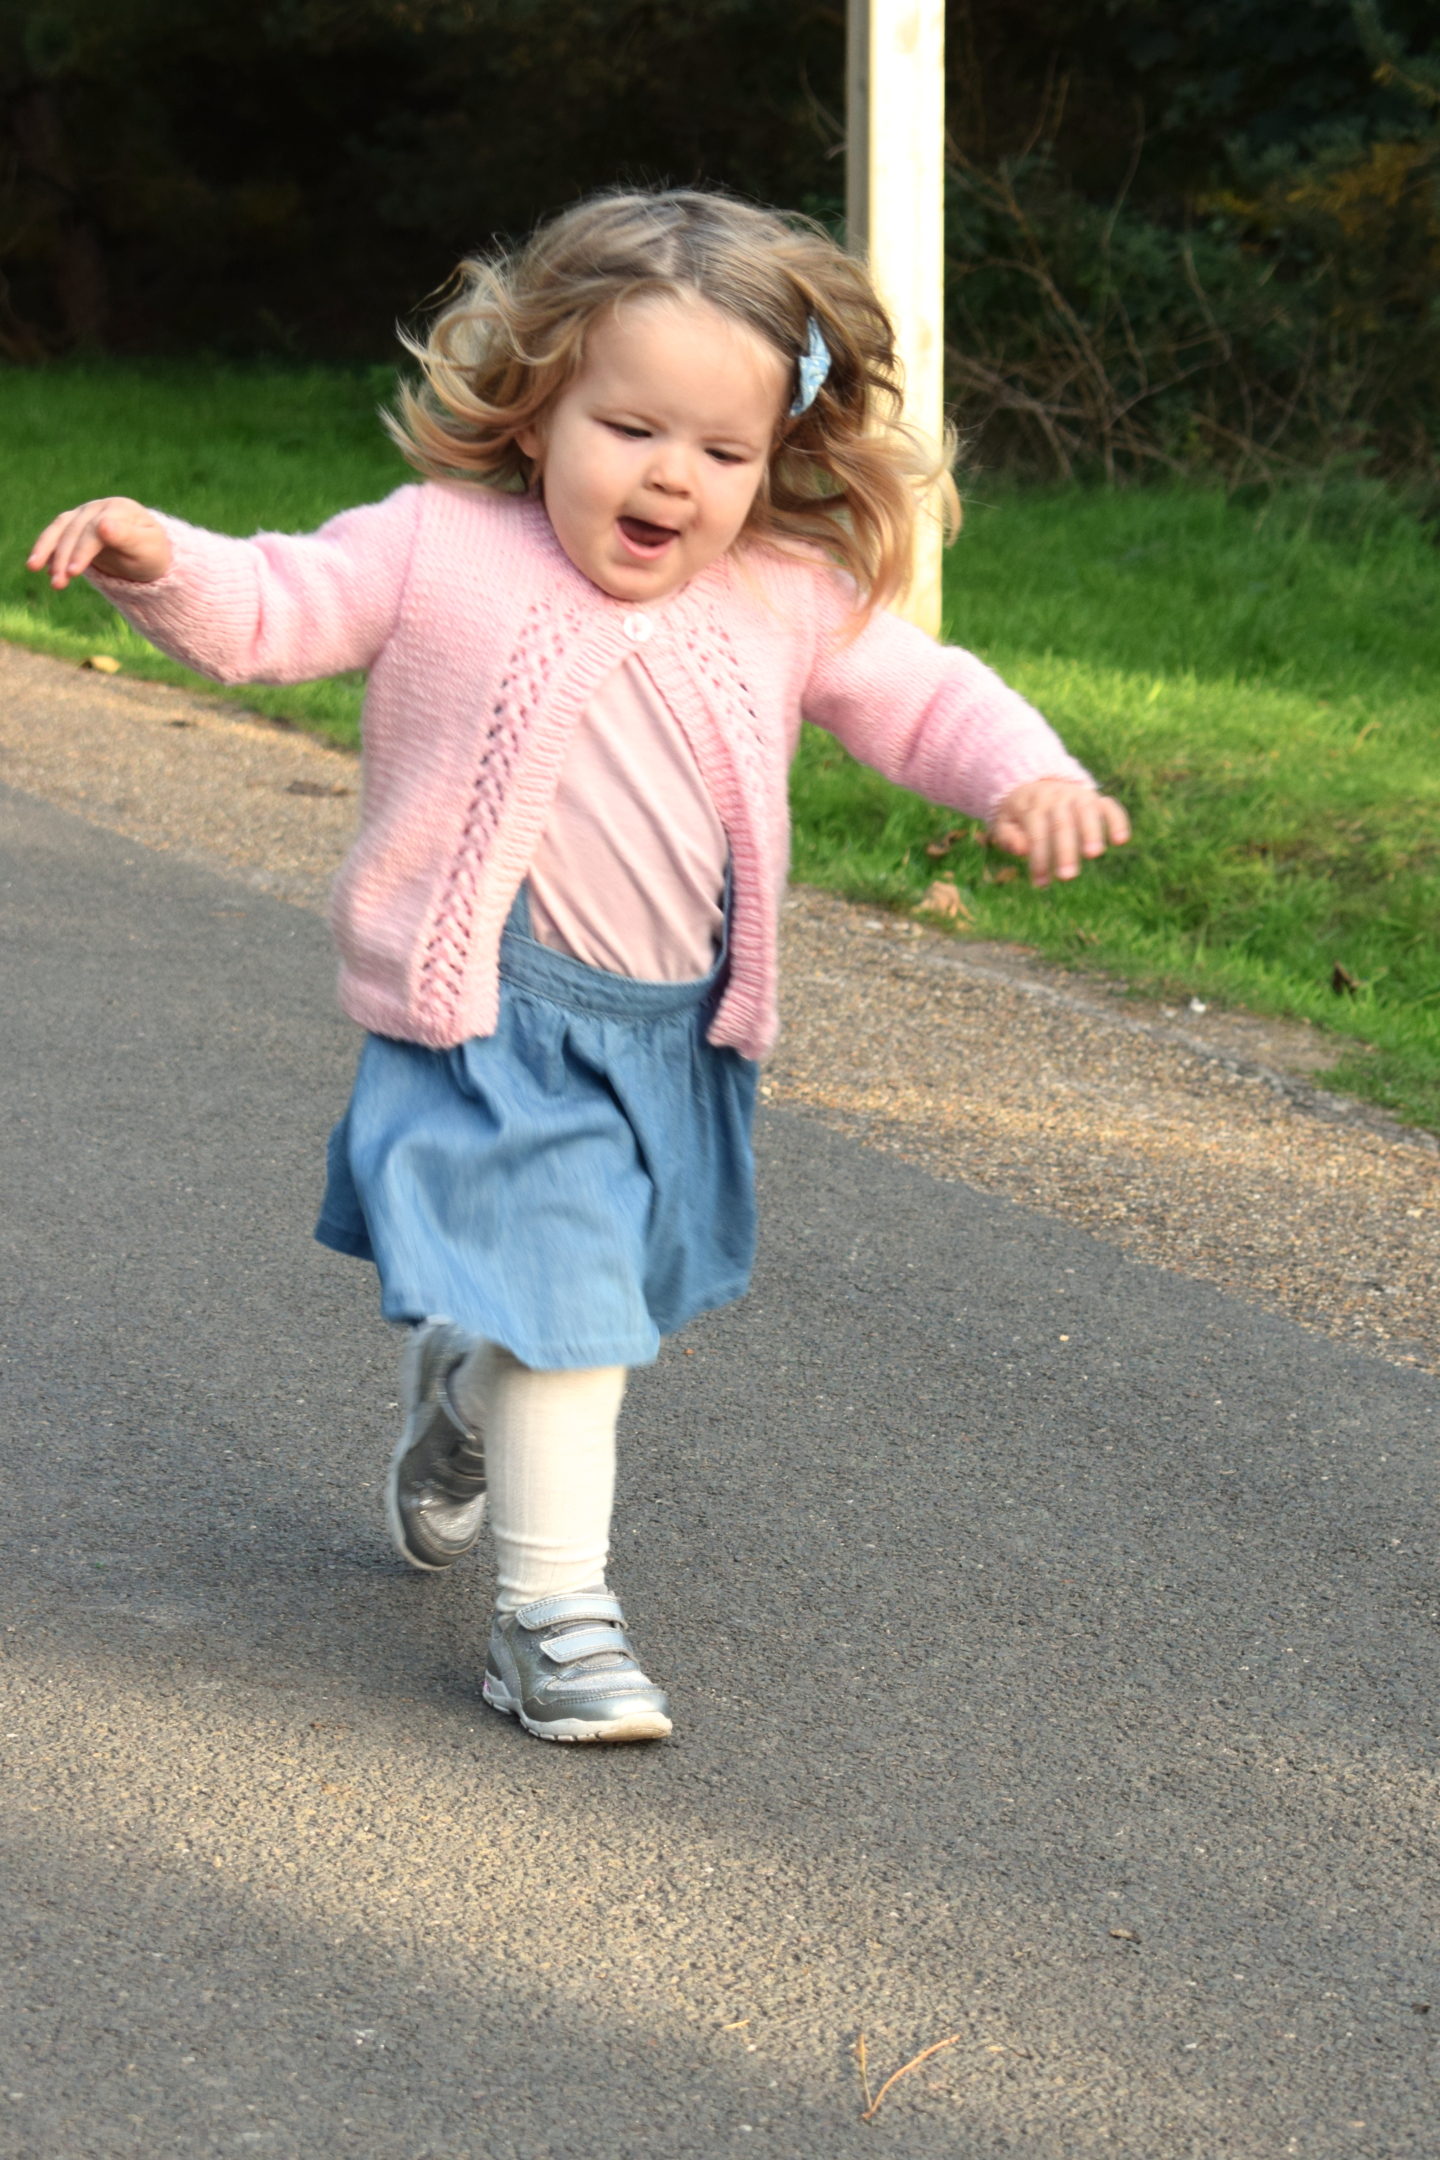 two and a half year old girl running down a path with arms outstretched, smiling, in pink cardigan and blue dress